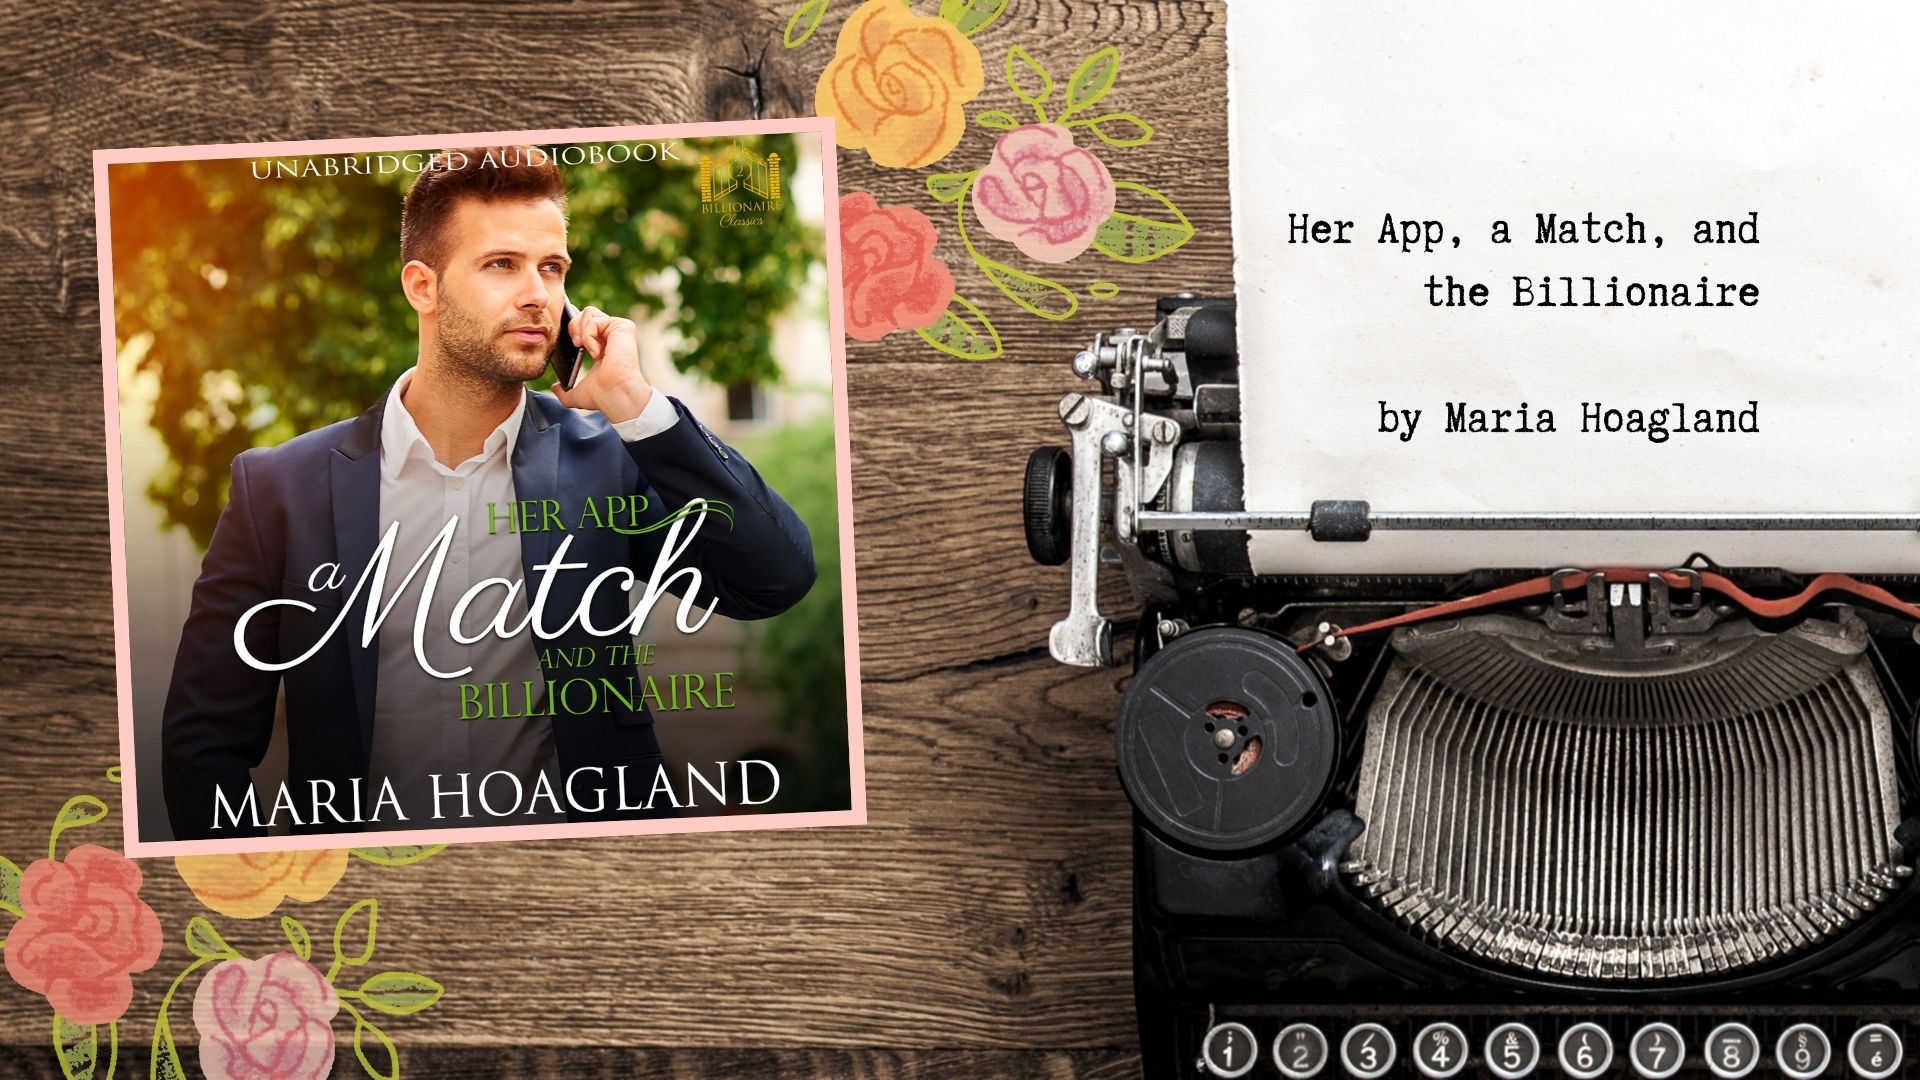 Her App, a Match, and the Billionaire by Maria Hoagland. Full audiobook on YouTube.